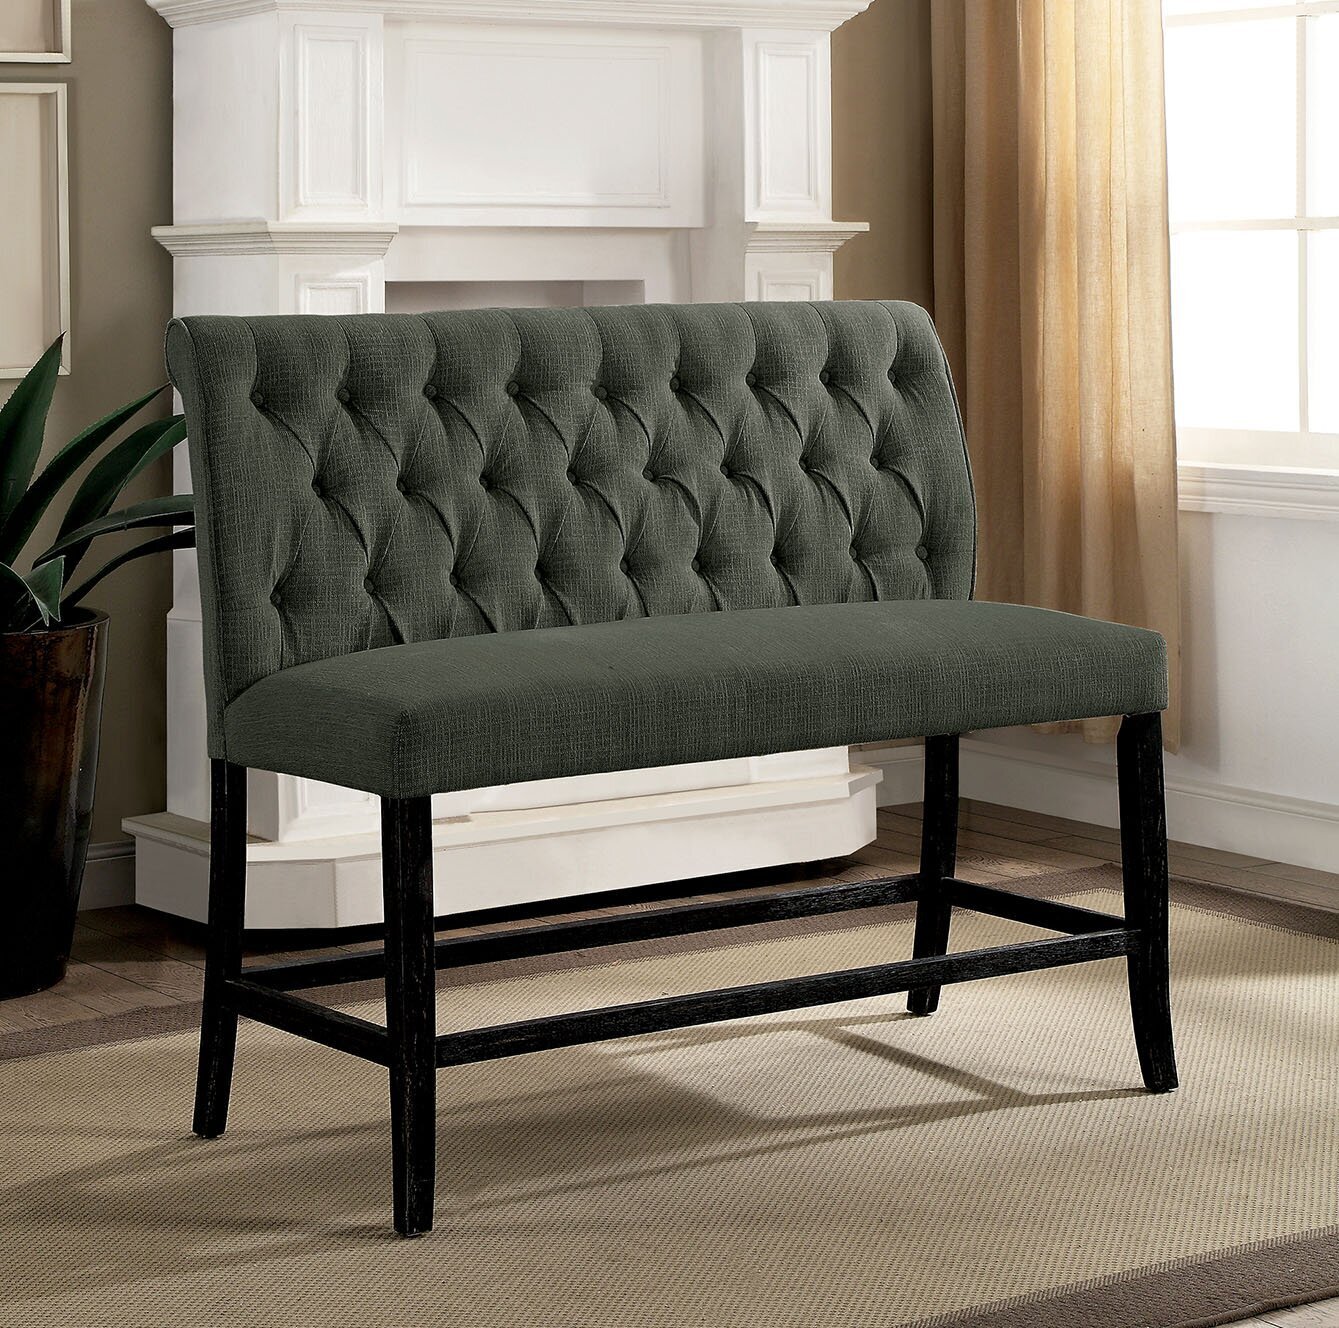 High back upholstered bench with footrests